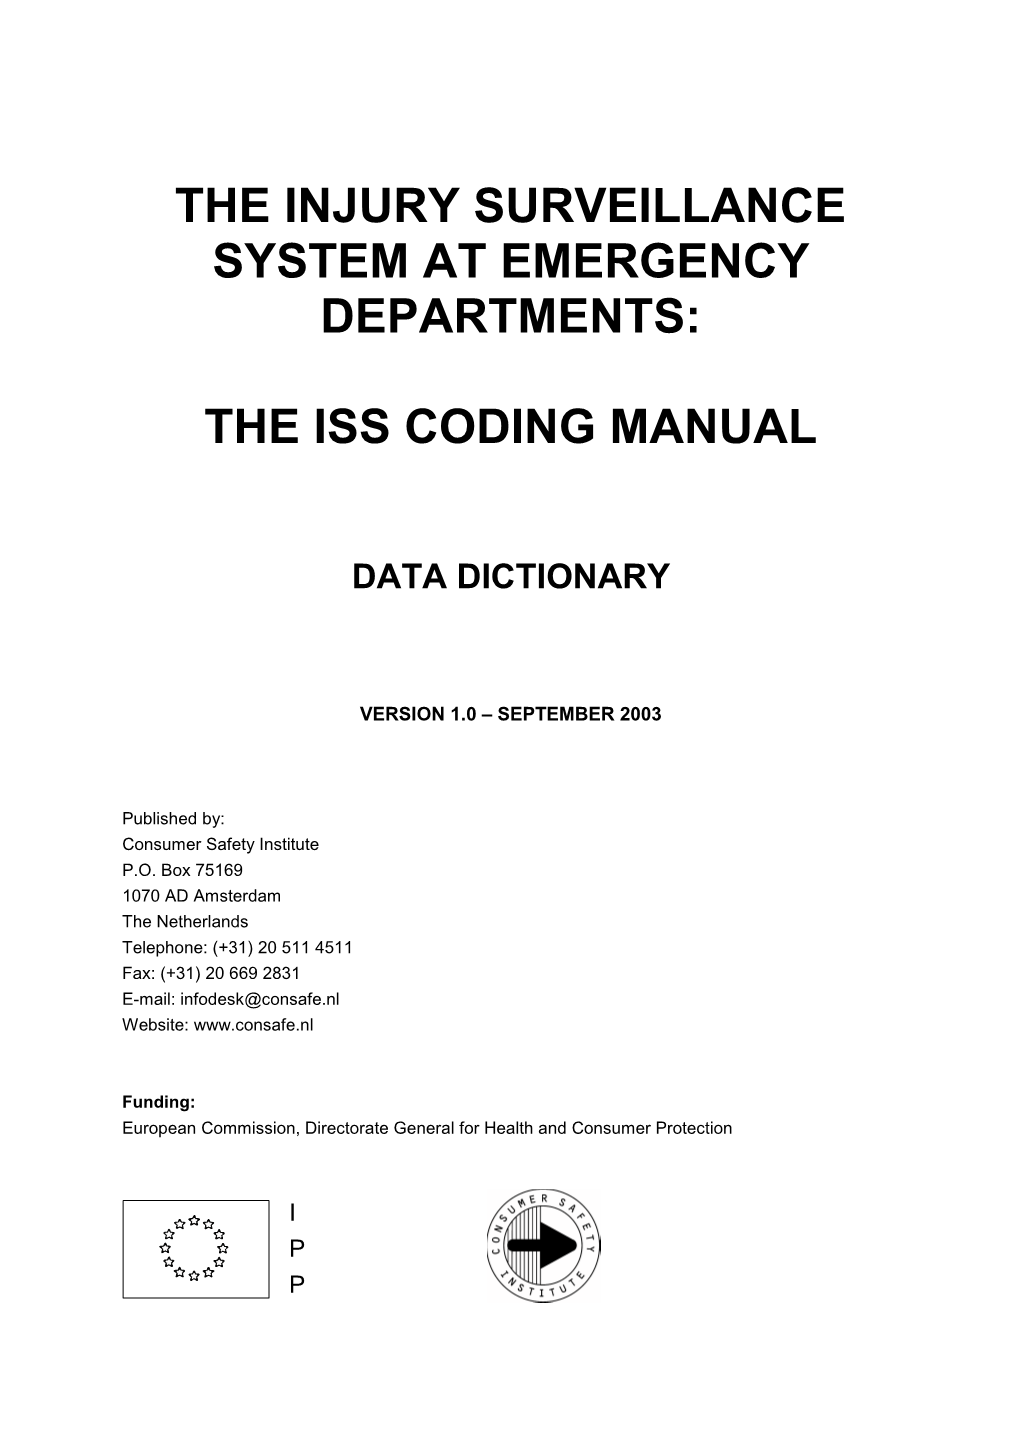 Developing a Coding Manual for an All-Injury